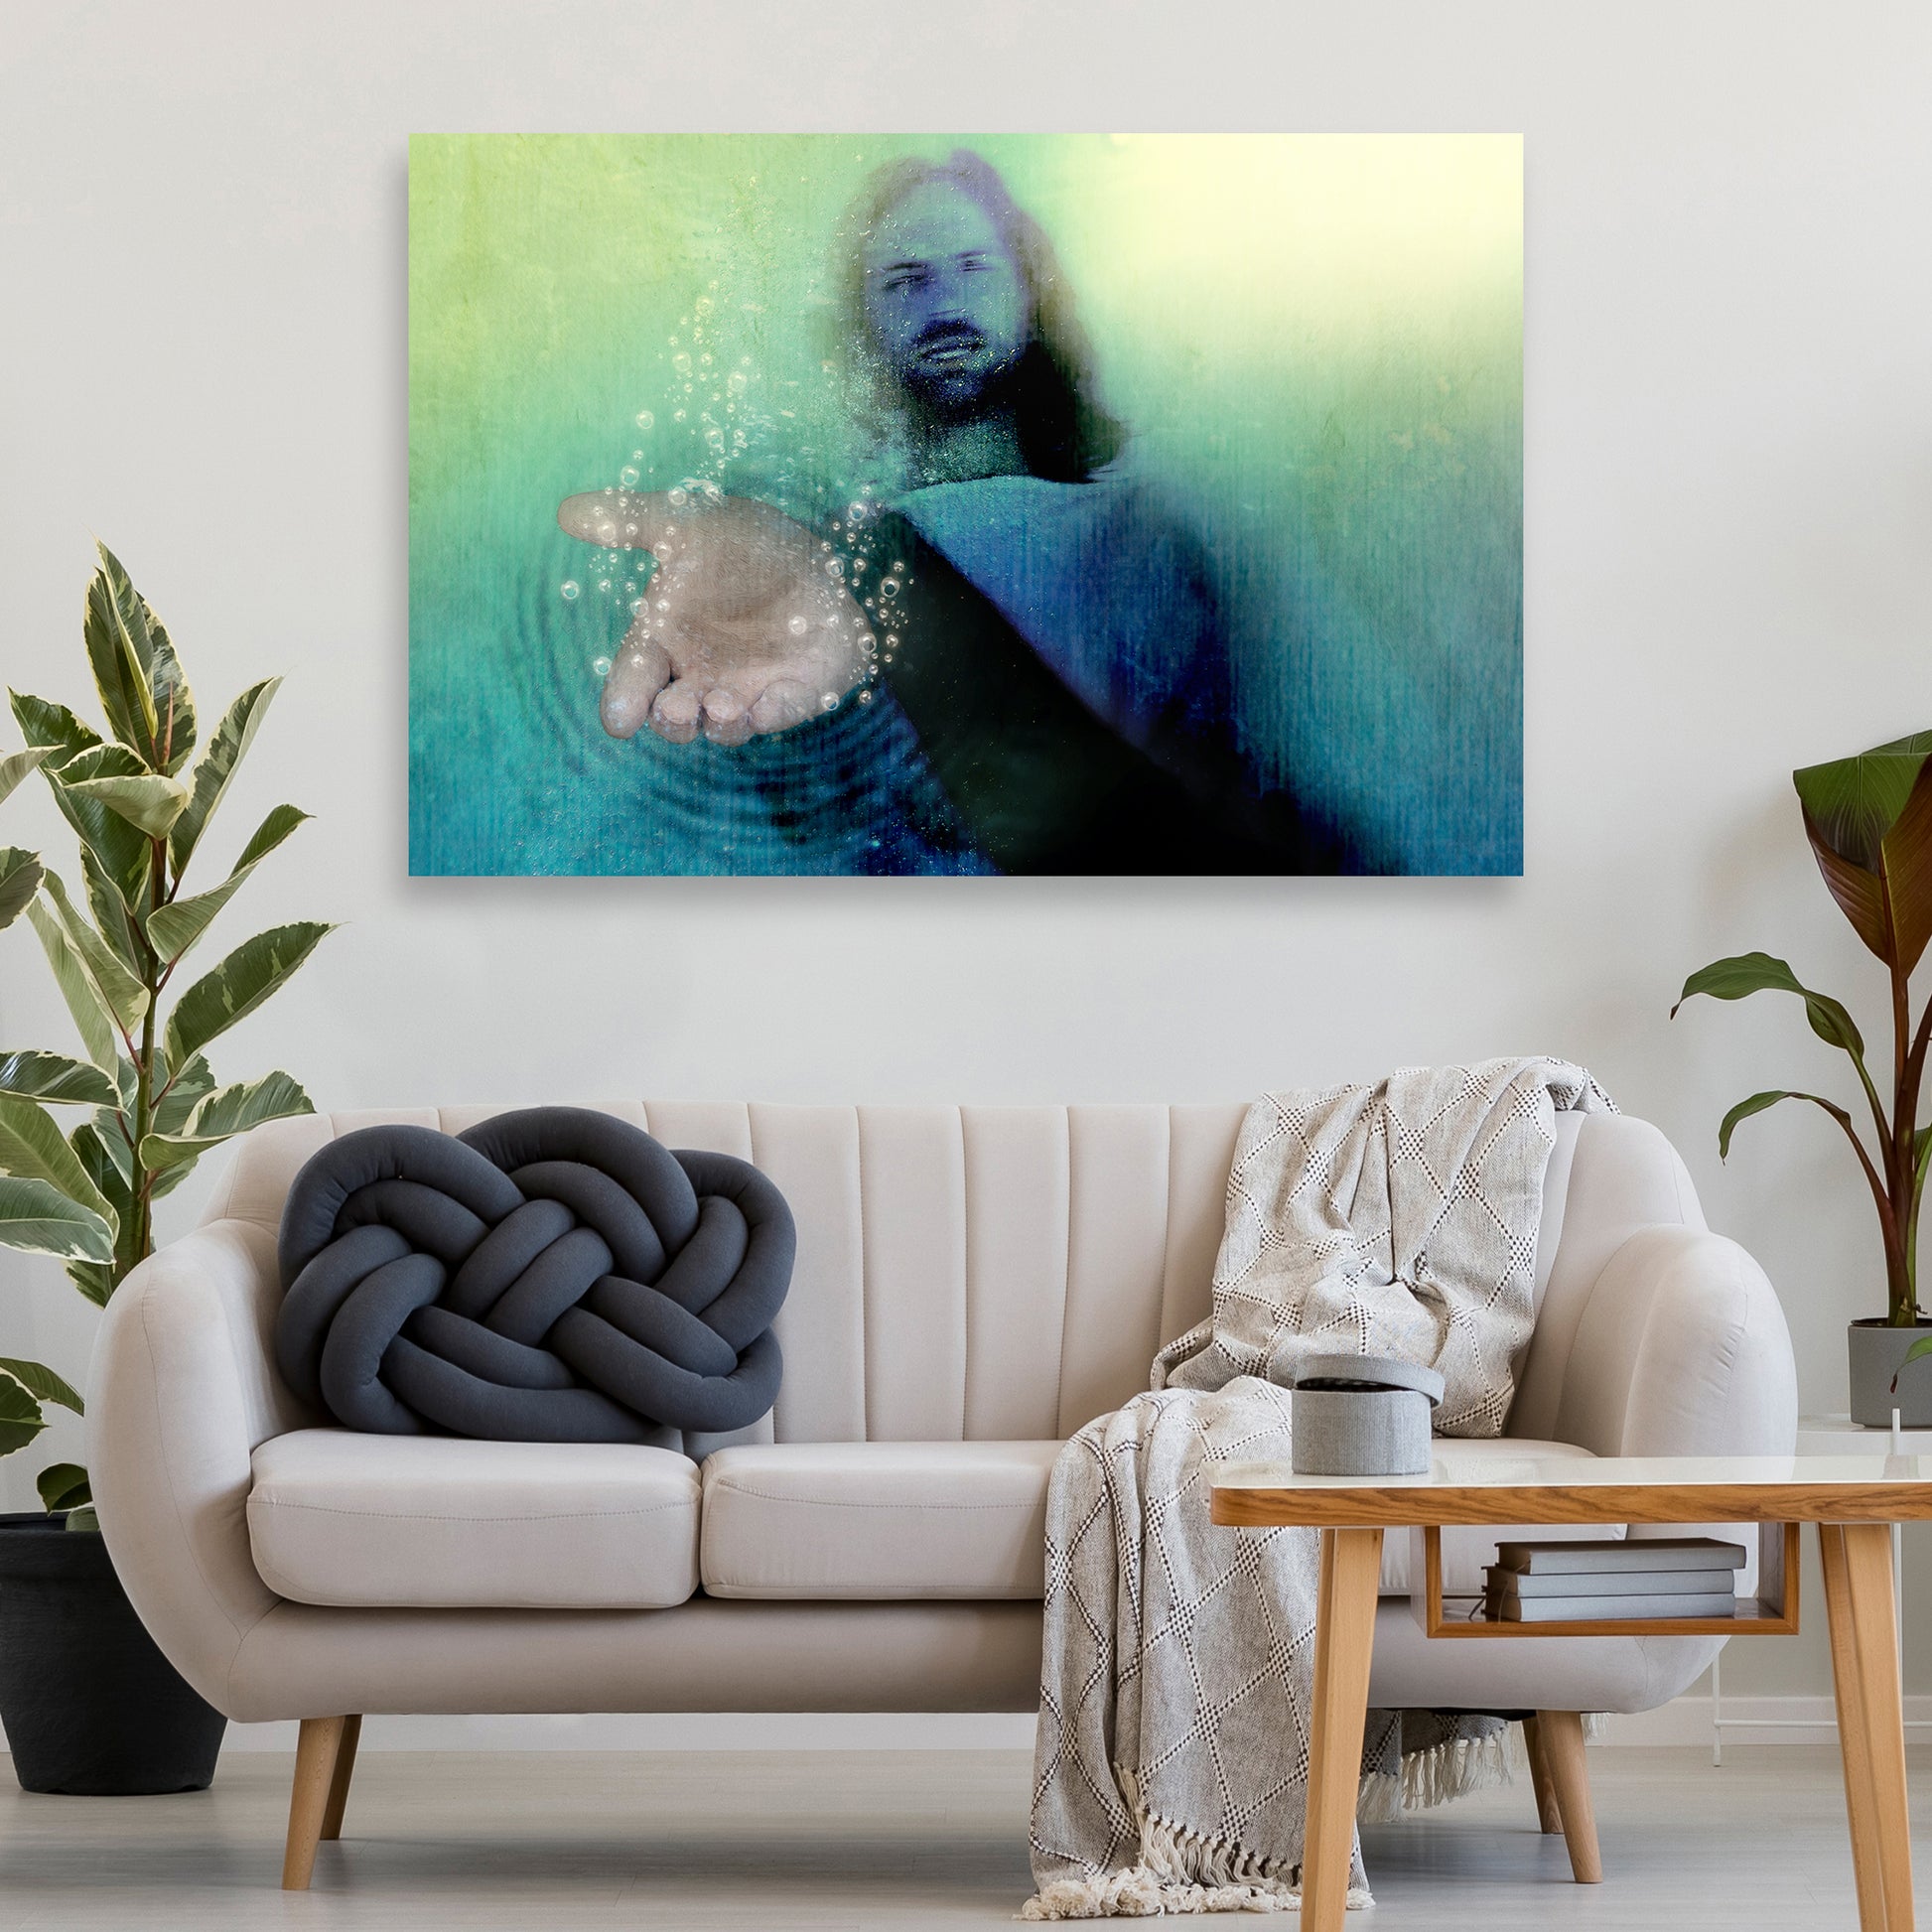 Walk With Jesus In Faith Canvas Wall Art Style 2 - Image by Tailored Canvases